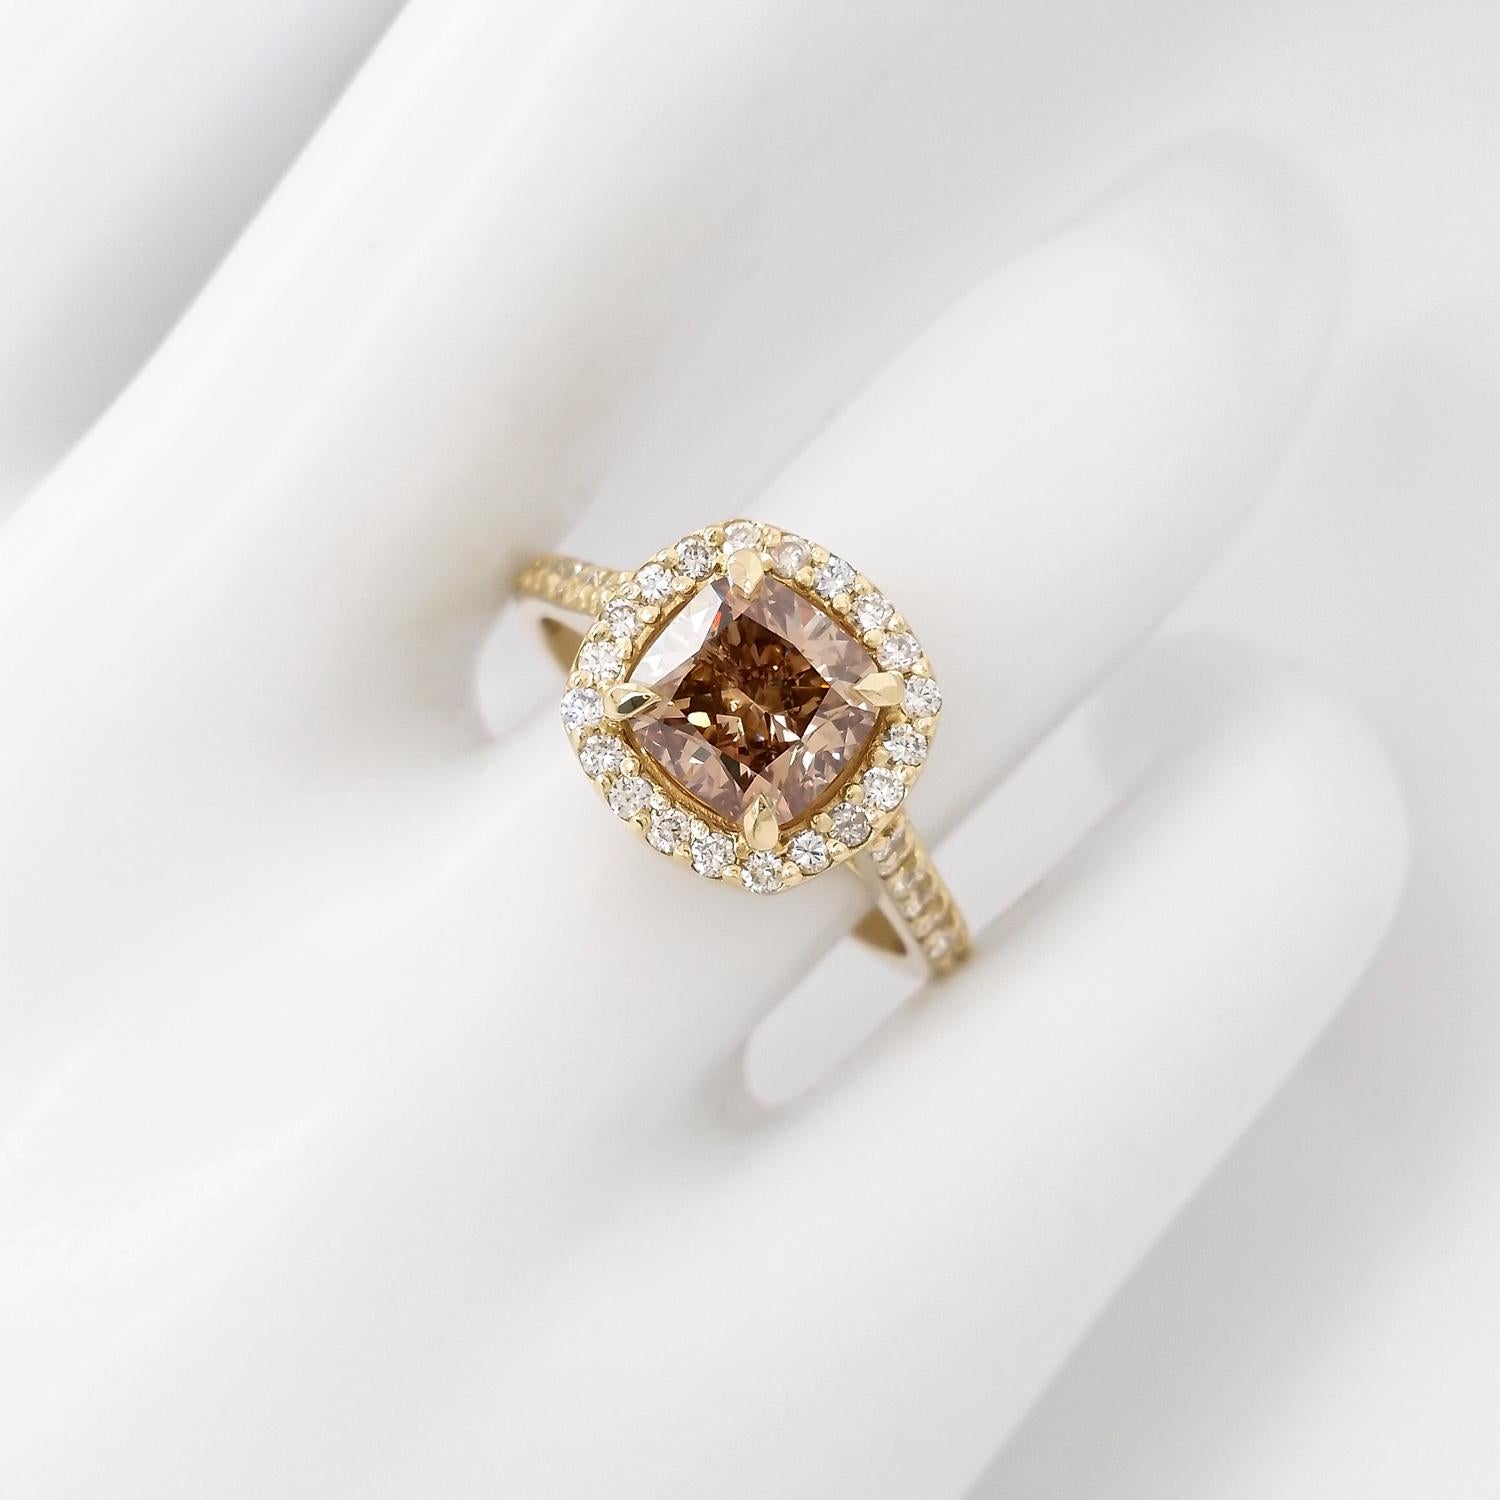 In this elegant and classy 14kt Yellow gold ring, 2.05 carat fancy yellowish brown diamond ring is surrounded by 34 natural round brilliant diamonds totaling 0.51 carats round brilliant diamonds and creating a very gentle and sparkly